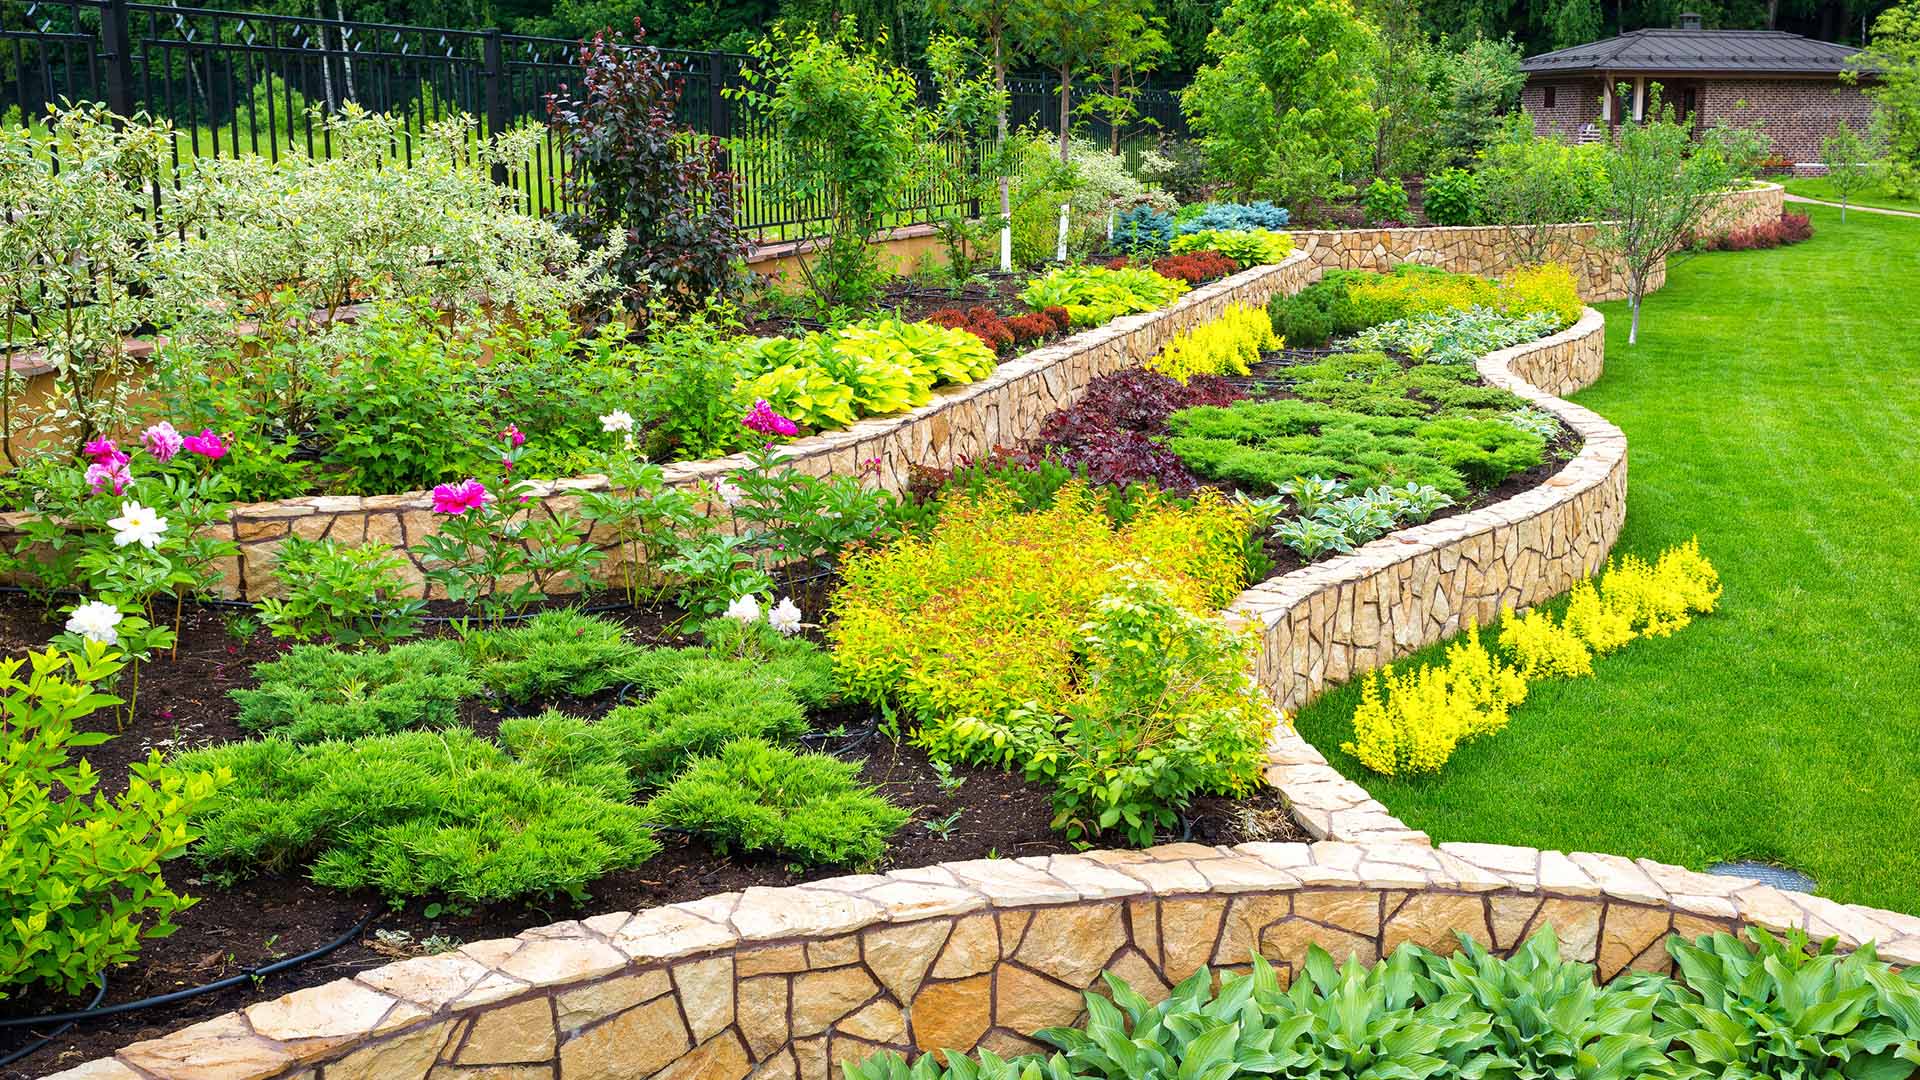 Looking for Hardscaping Services in the Windsor, CO Area?